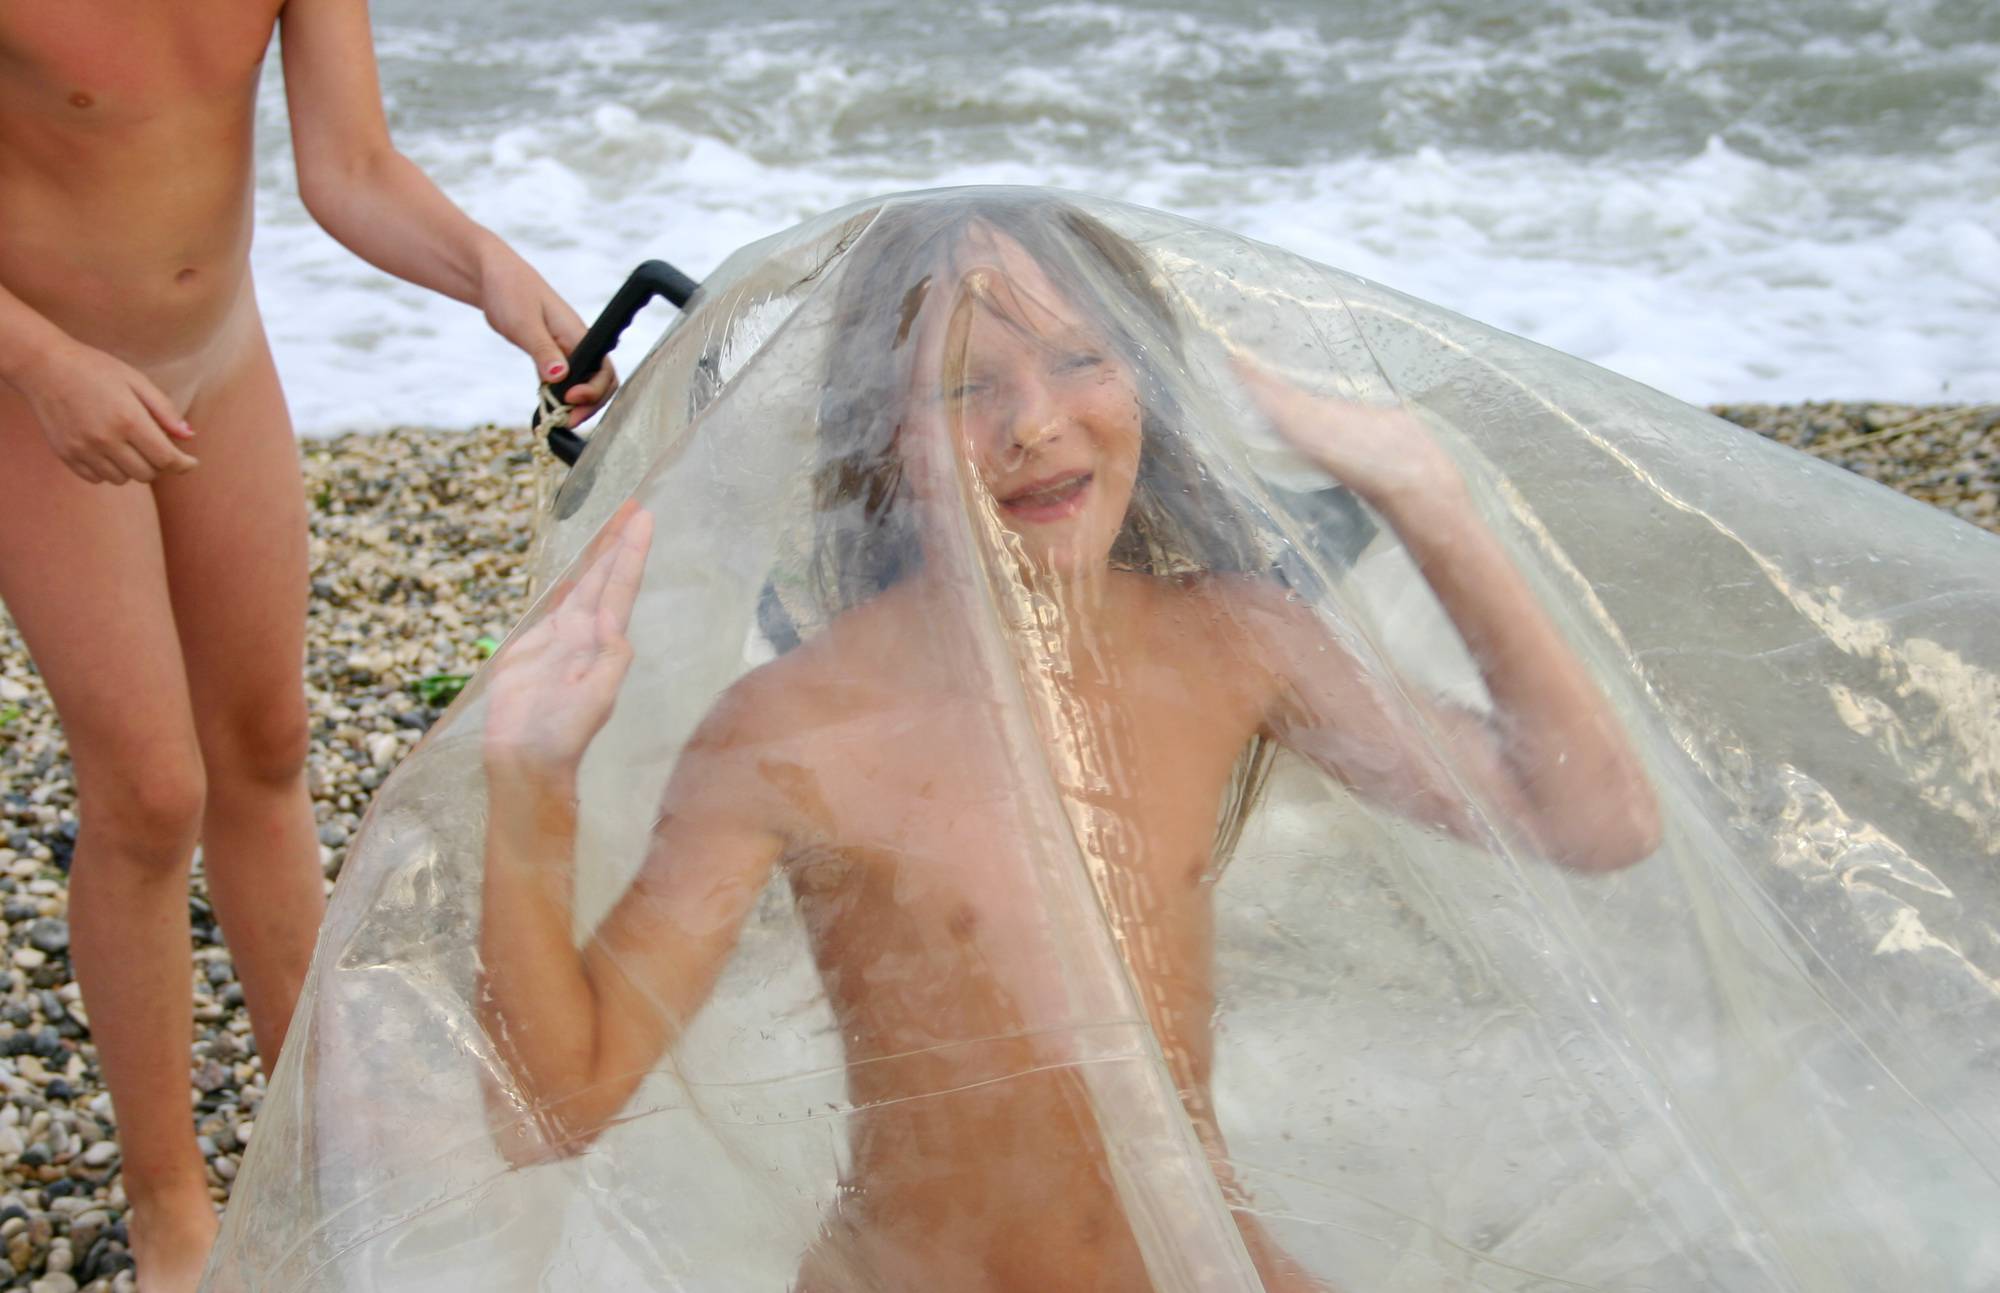 Pure Nudism-Getting Into the Bubble - 2